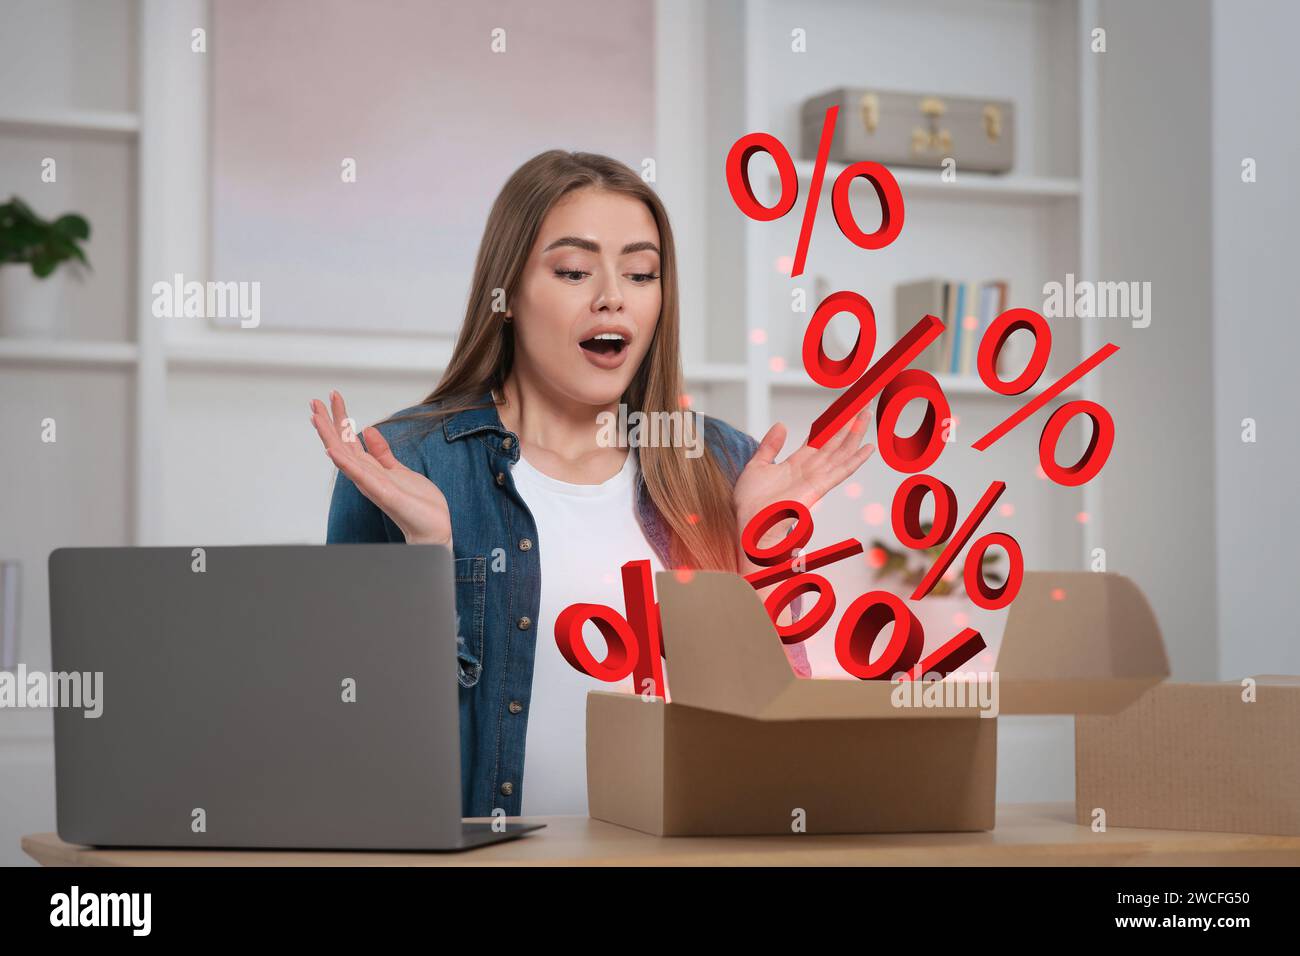 Discount offer. Woman shocked by percents signs flying out of open box at home Stock Photo